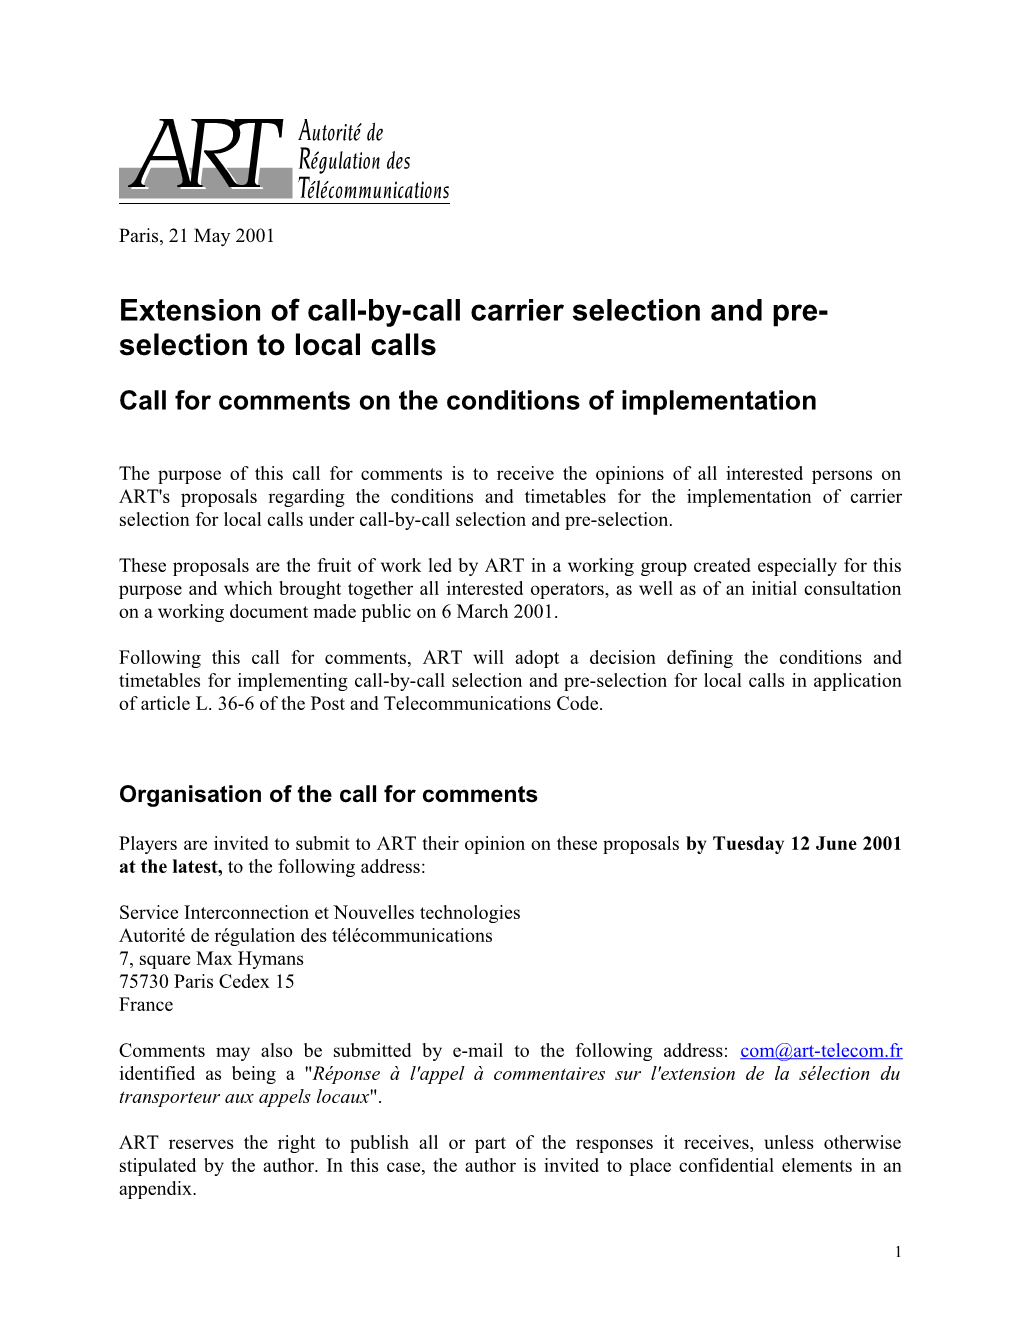 Extension of Call-By-Call Carrier Selection and Pre-Selection to Local Calls